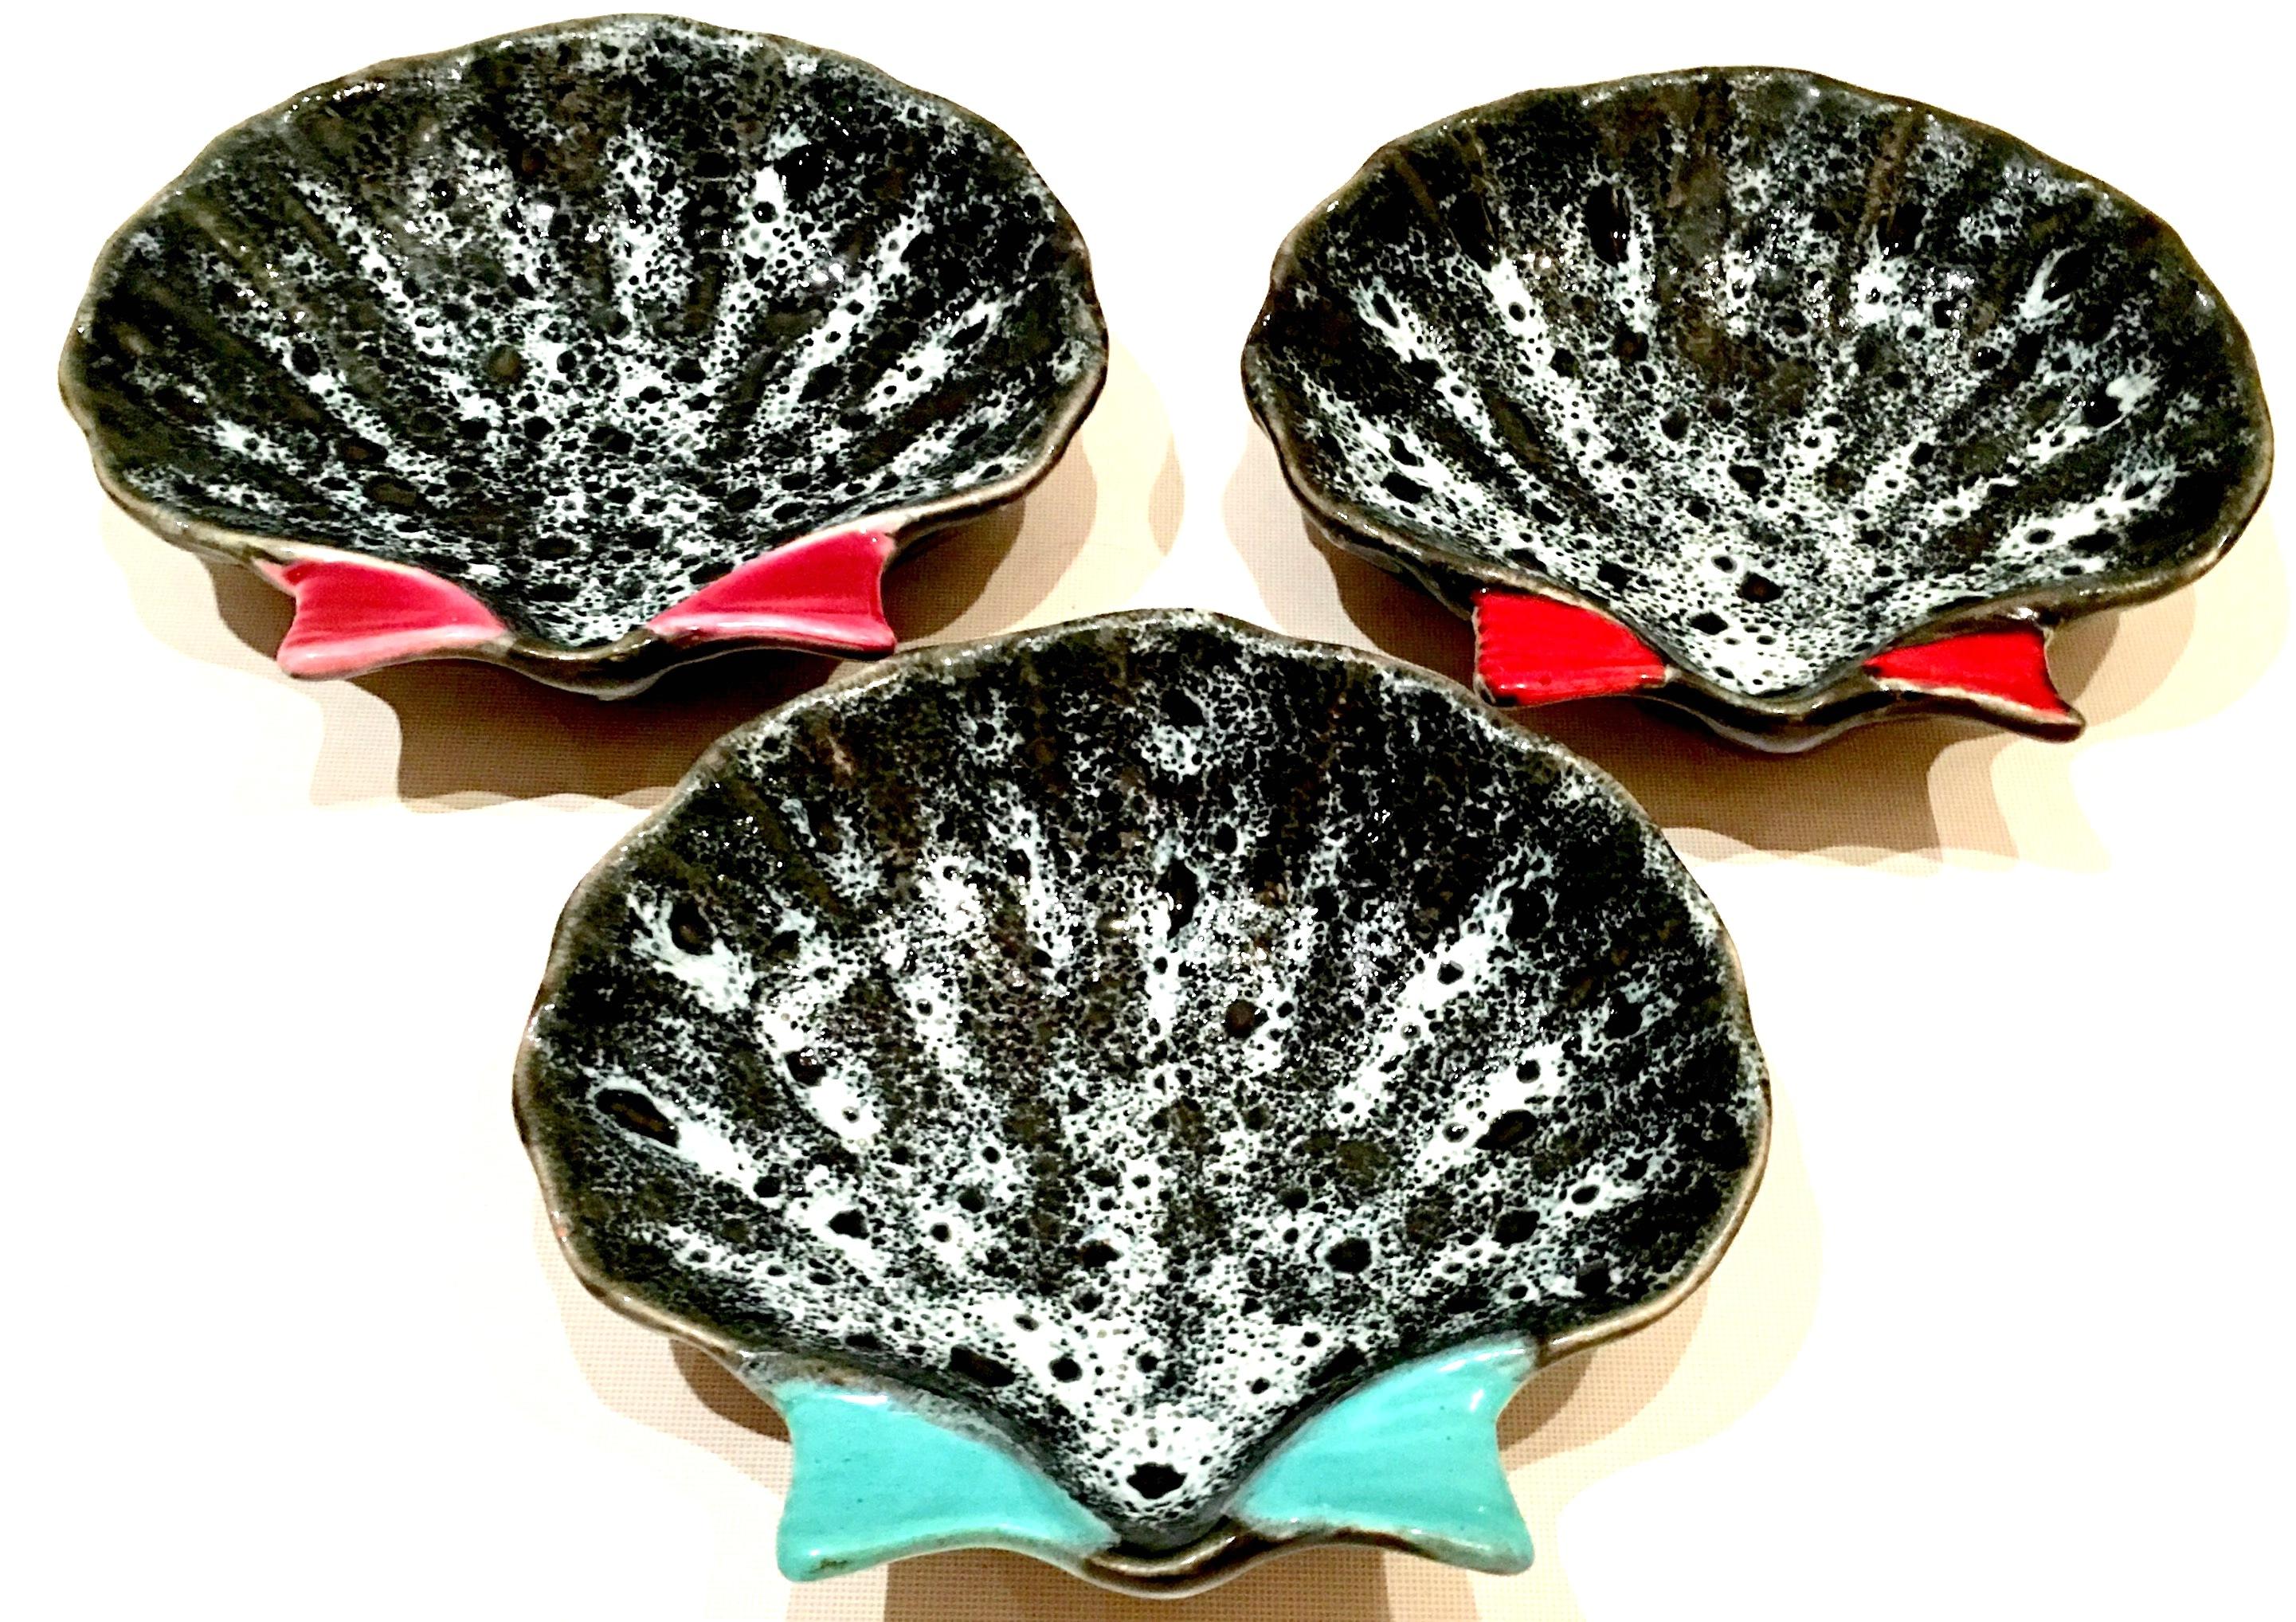 Mid-20th century French hand painted pottery oyster dish set of three pieces by, Luc Vallauris. Each dish has a different fin color, turquoise, pink and red. These south of France ceramic glaze and hand painted oyster dishes are each signed on the